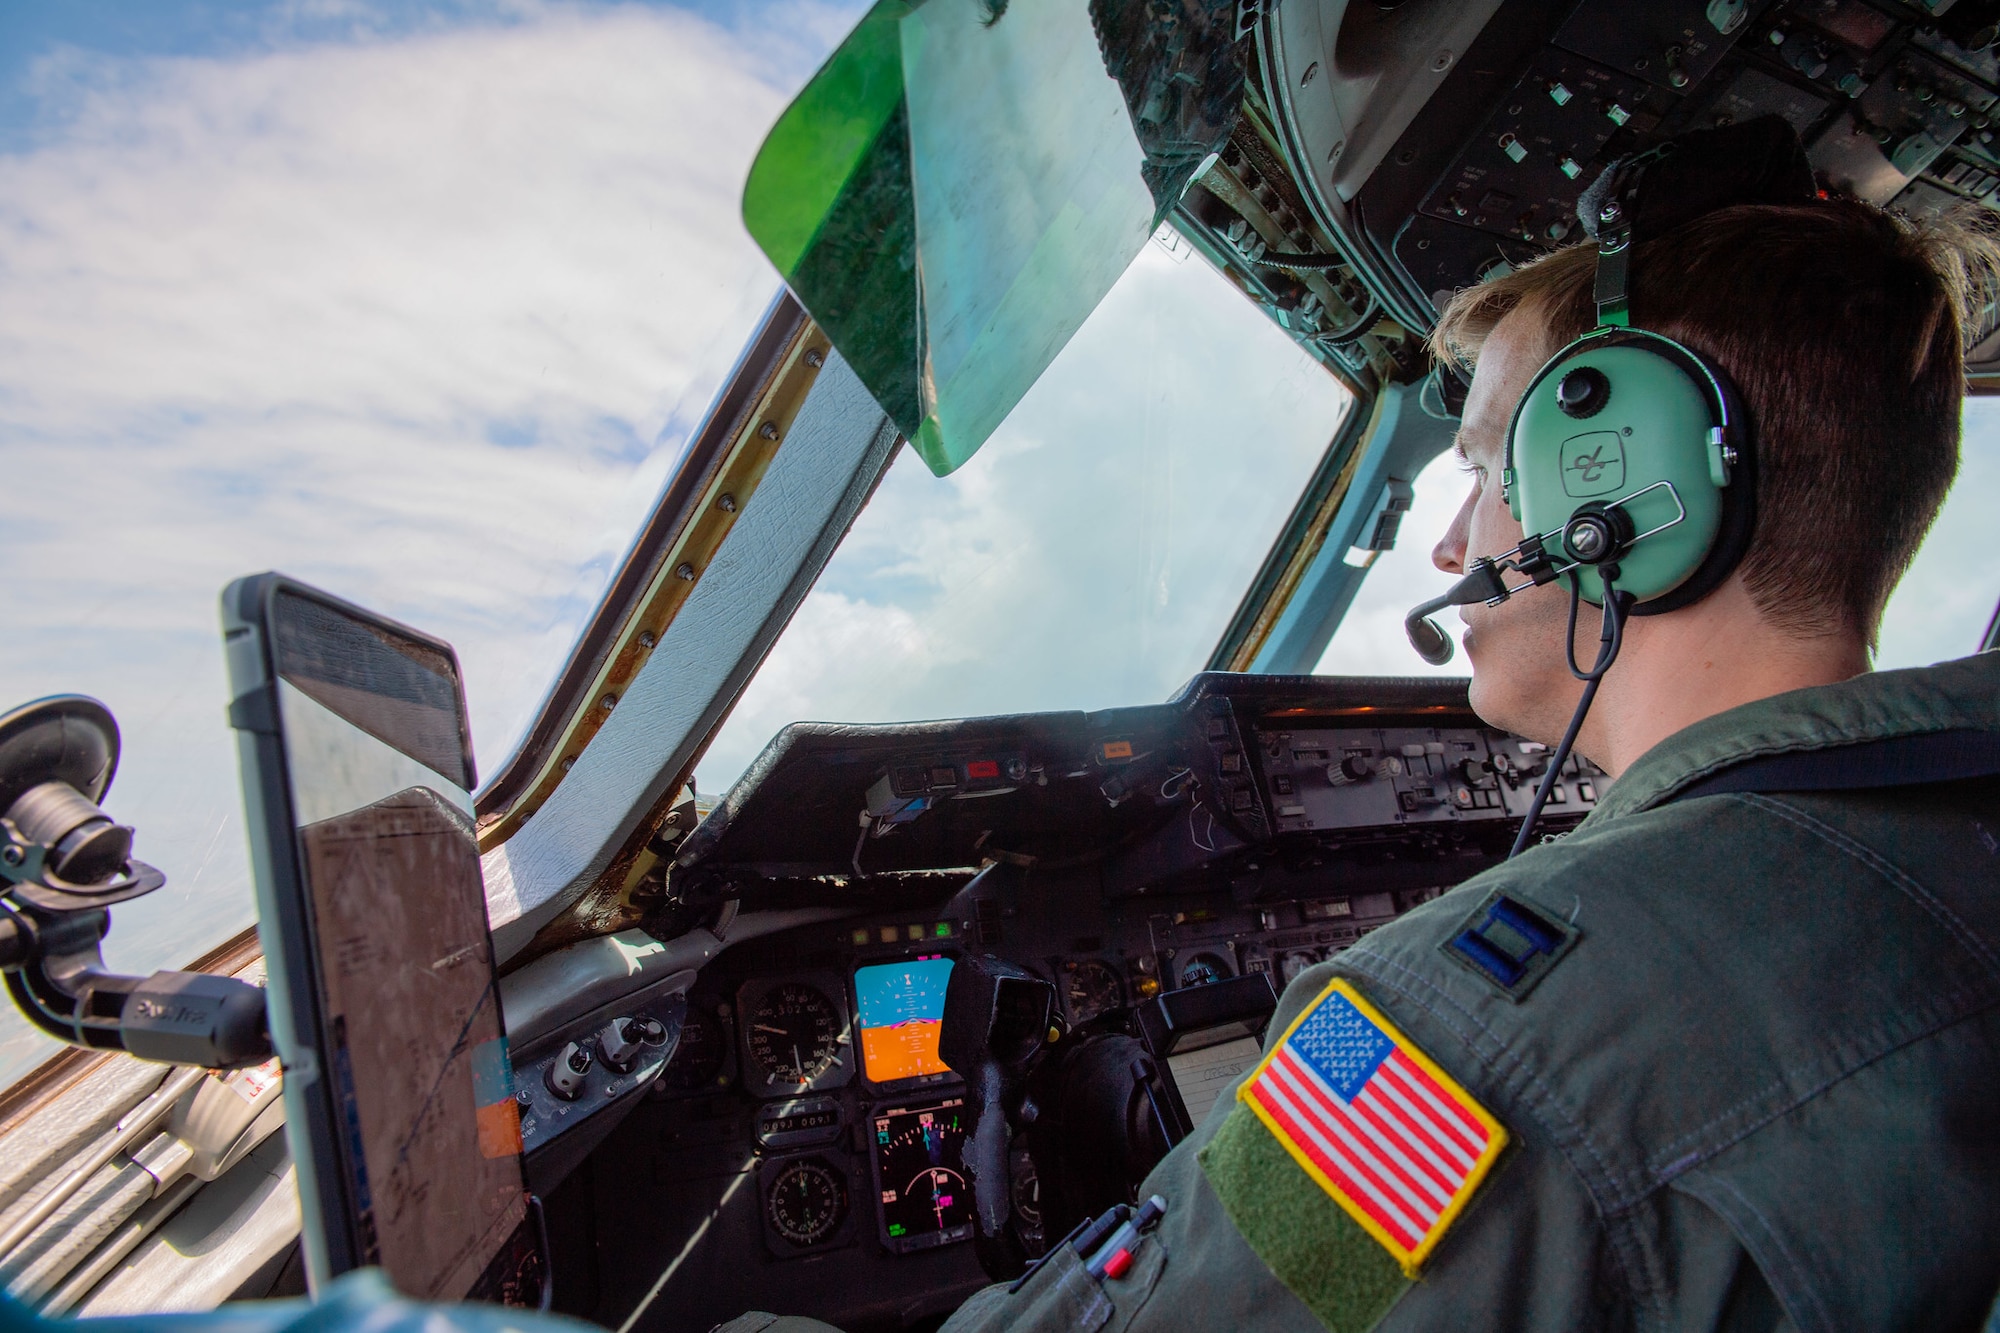 U.S. Air Force Captain Booth, a 76 Air Refueling Squadron pilot, flies a KC-10 Extender from Joint Base McGuire-Dix-Lakehurst, New Jersey, to Key West, Florida, during a training mission March 30, 2021. Reservists with the 514th Air Mobility Wing flies and maintains KC-10s and C-17 Globemaster IIIs.